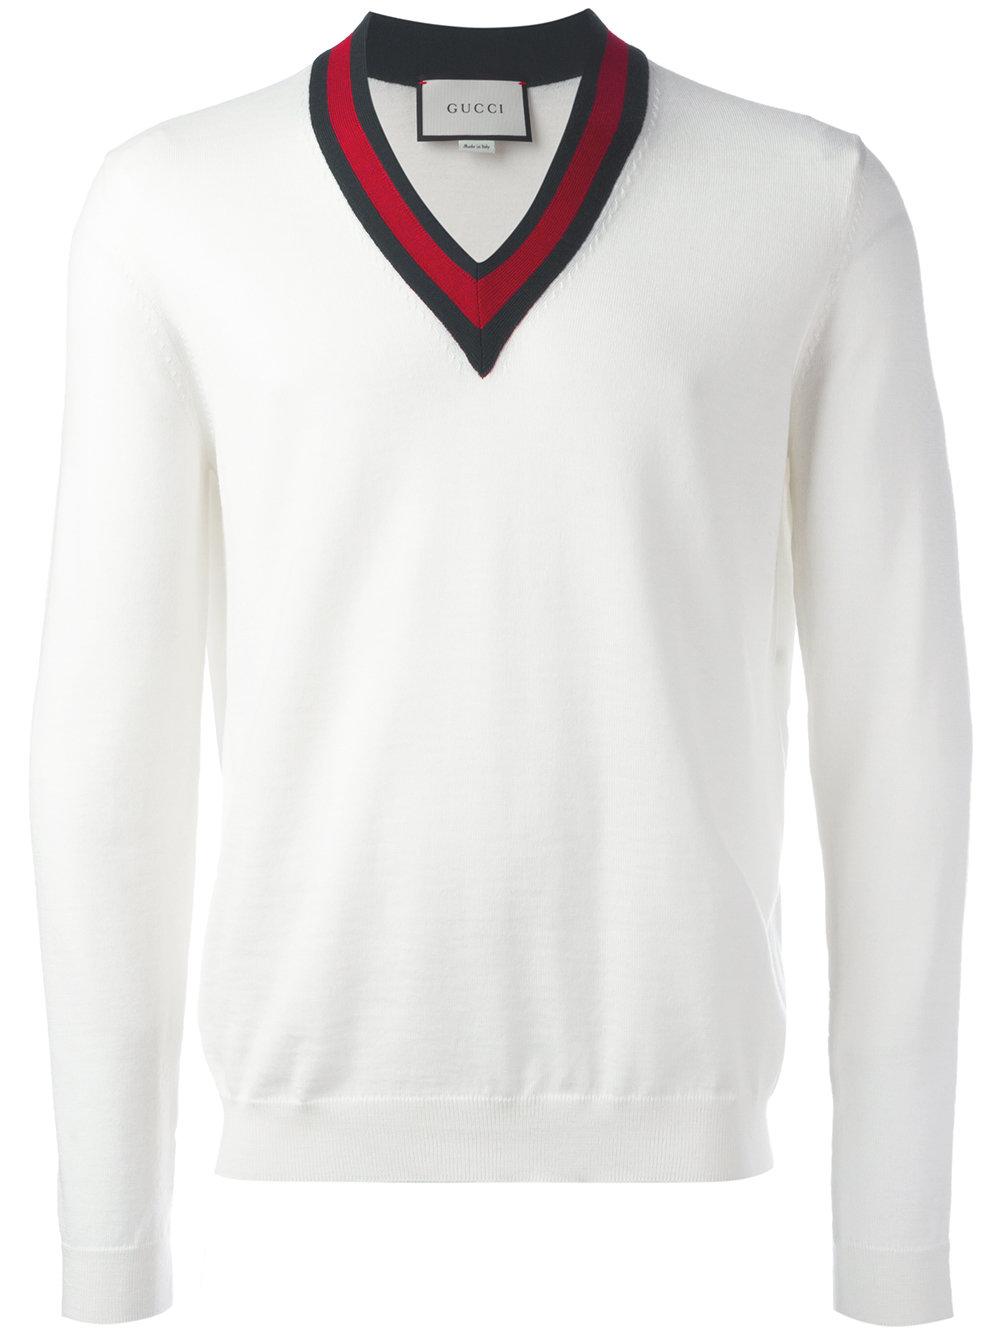 With gucci sweaters for men white cheap furniture monthly rockville